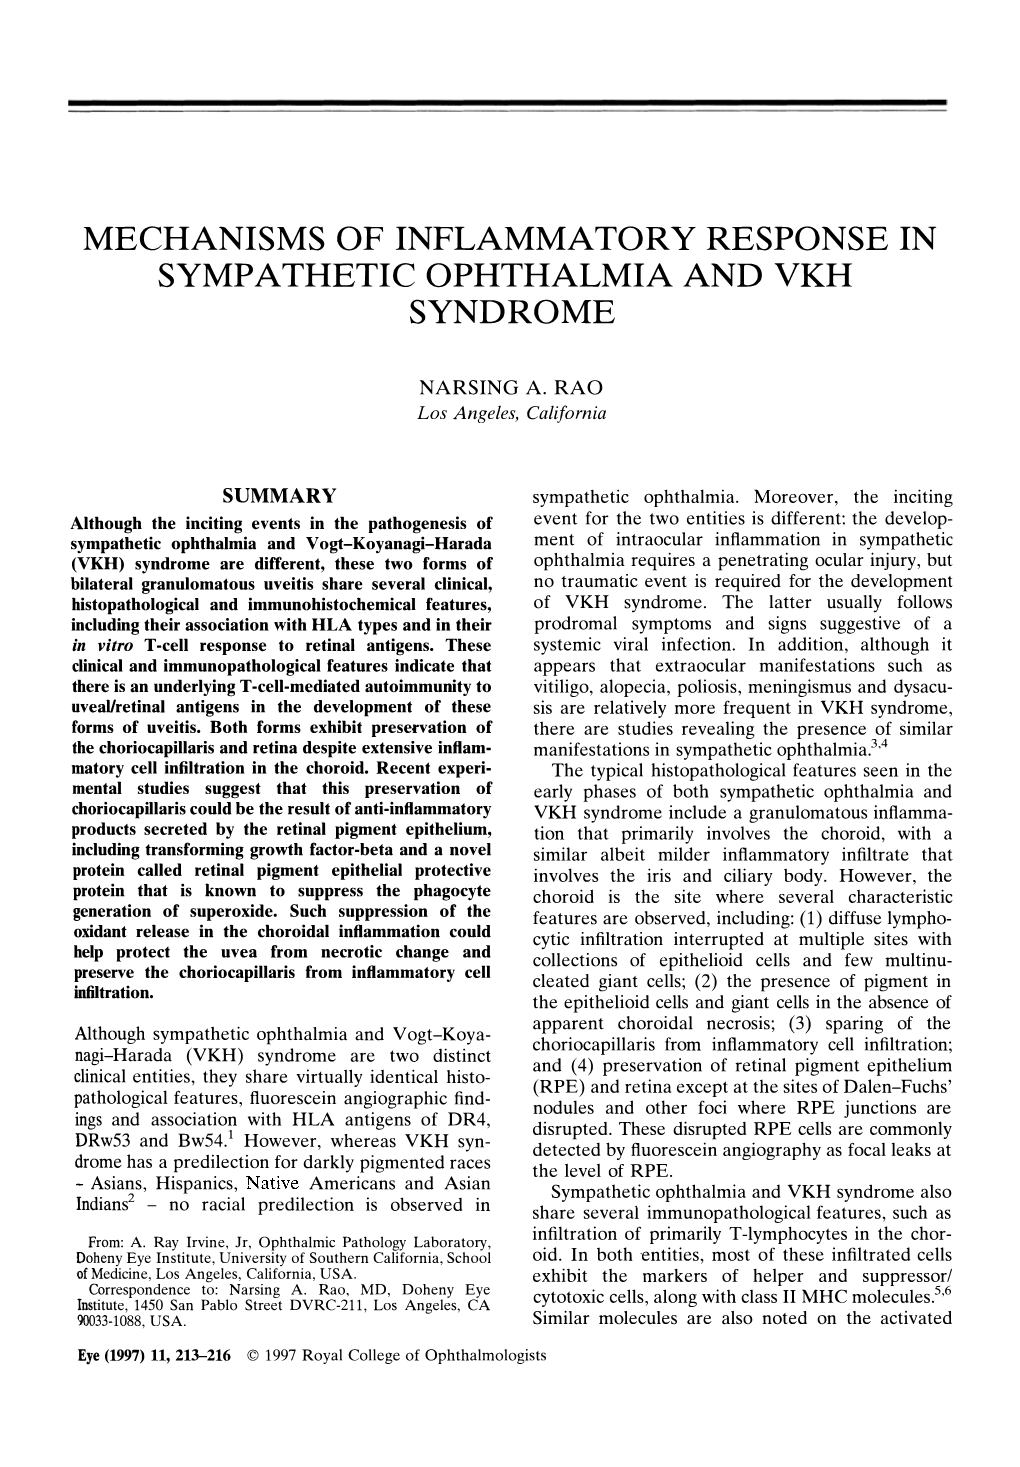 Mechanisms of Inflammatory Response in Sympathetic Ophthalmia and Vkh Syndrome